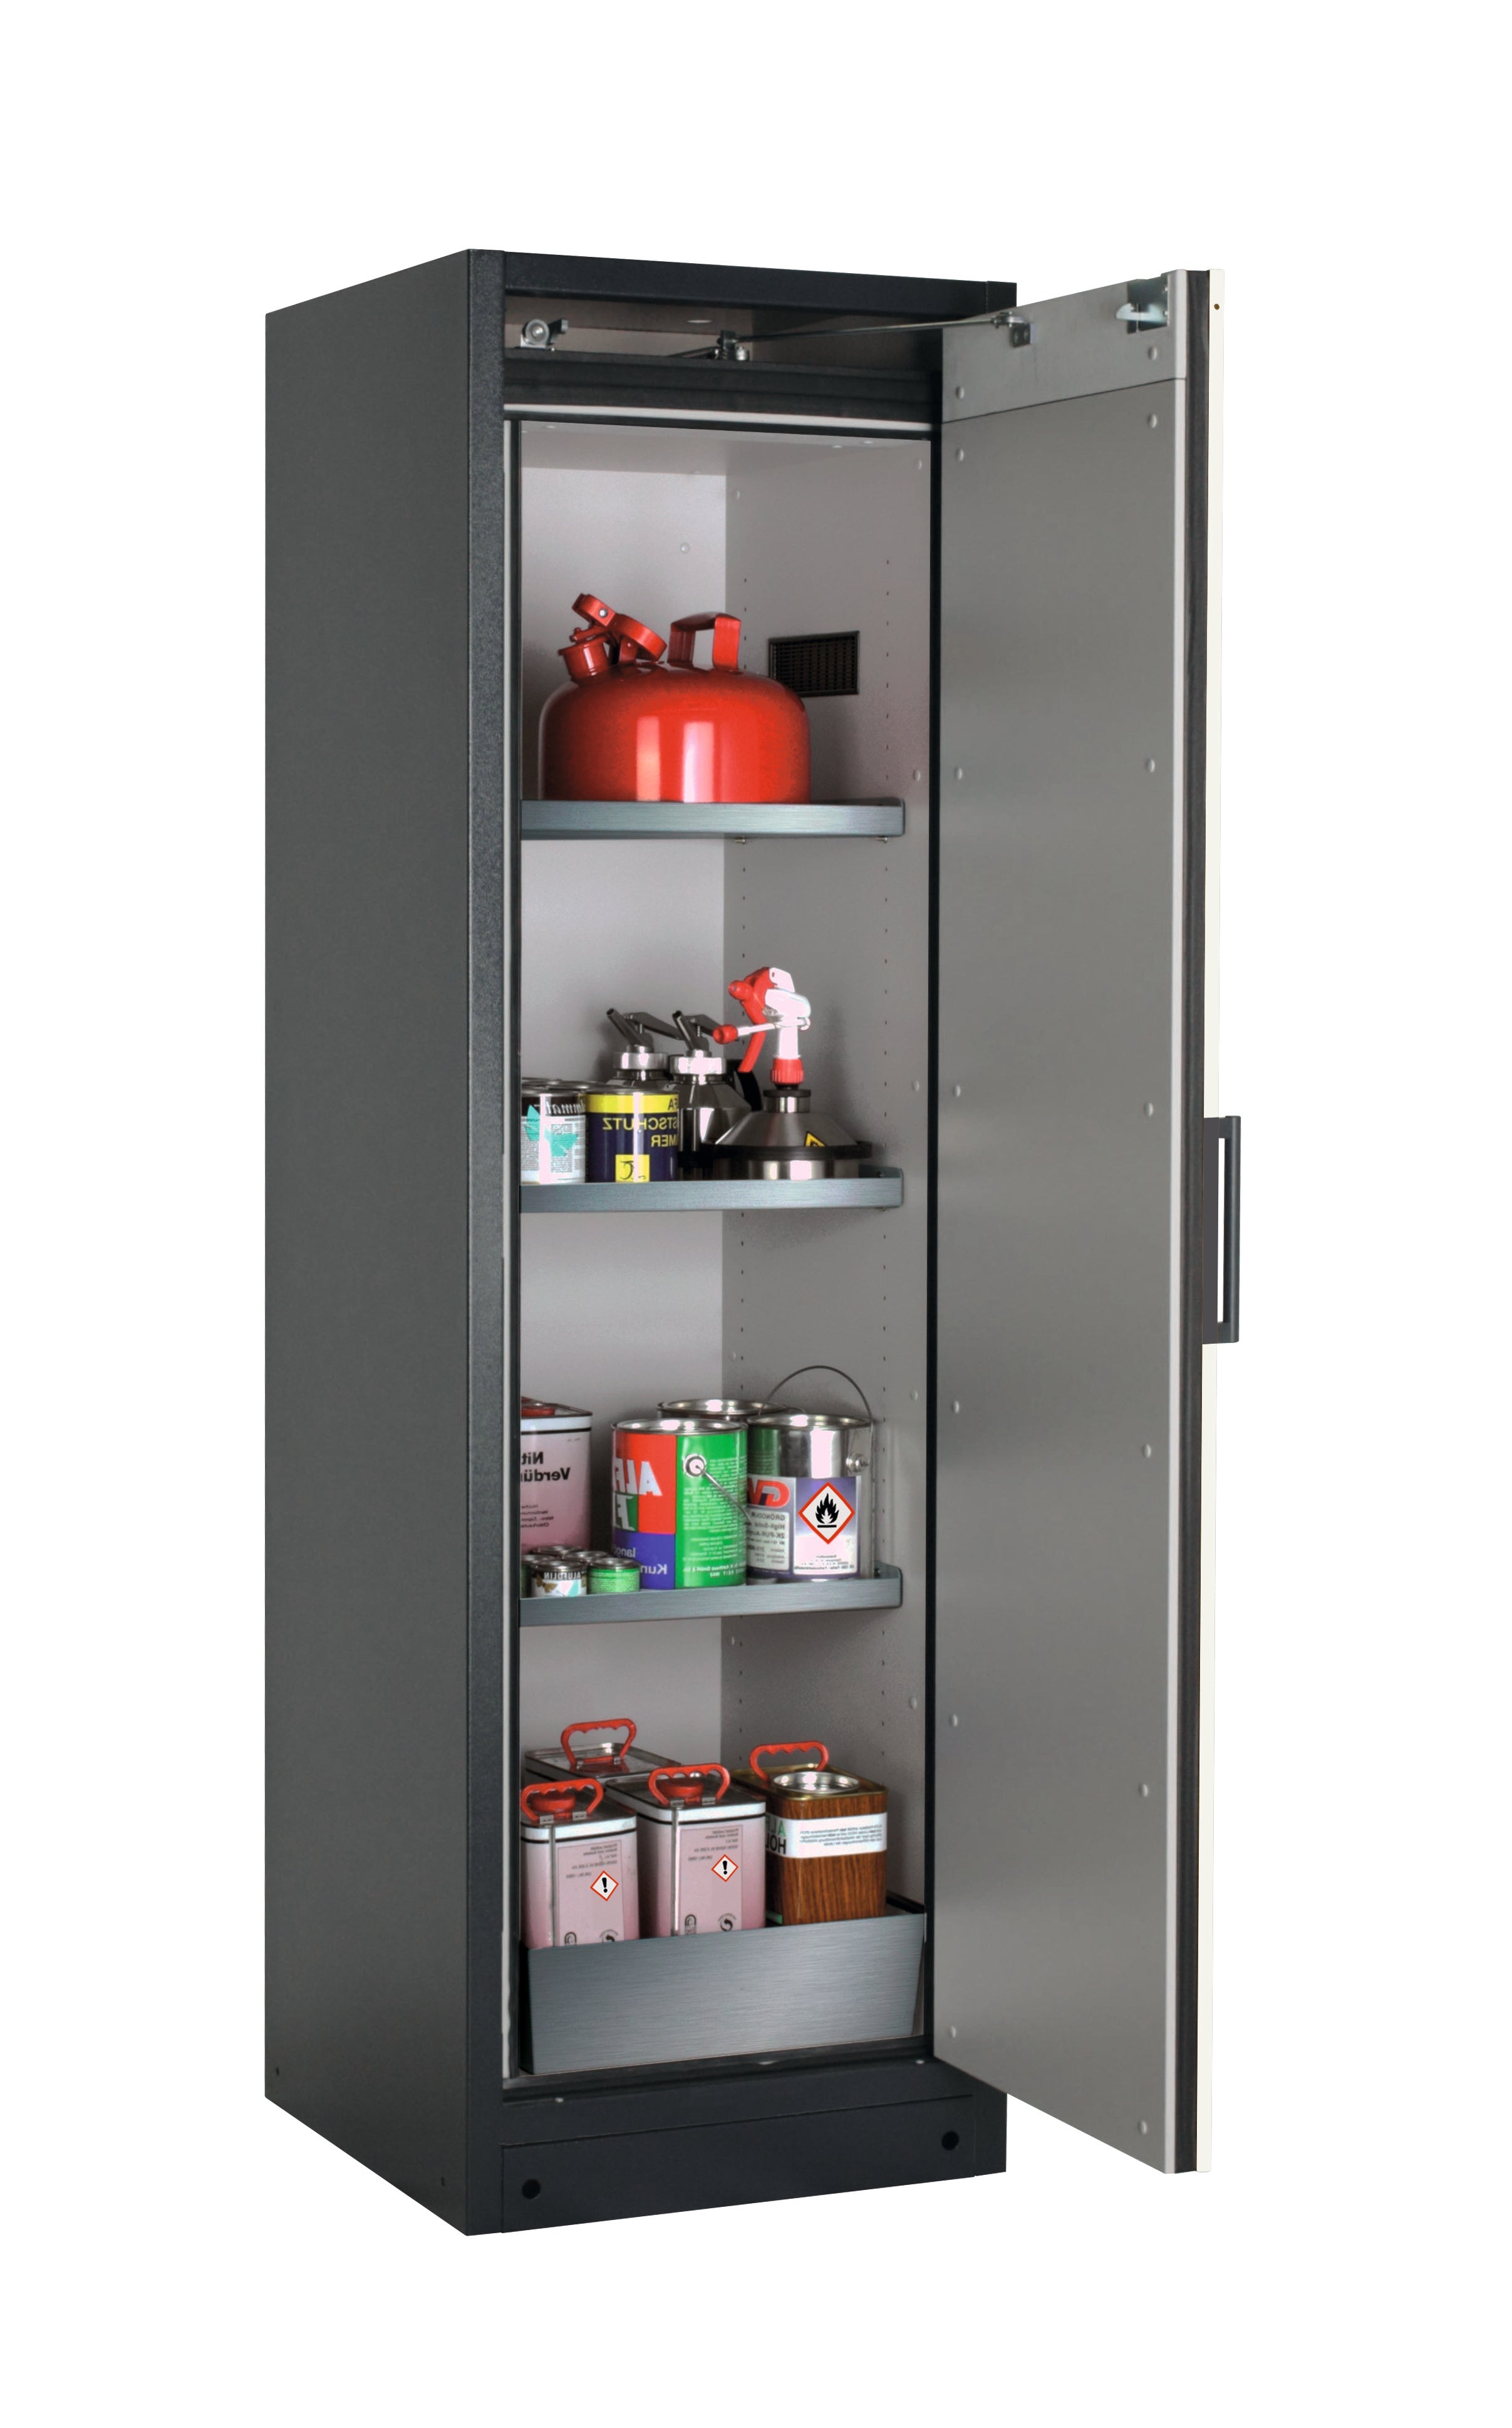 Type 90 safety storage cabinet Q-CLASSIC-90 model Q90.195.060.R in asecos silver with 3x shelf standard (stainless steel 1.4301),